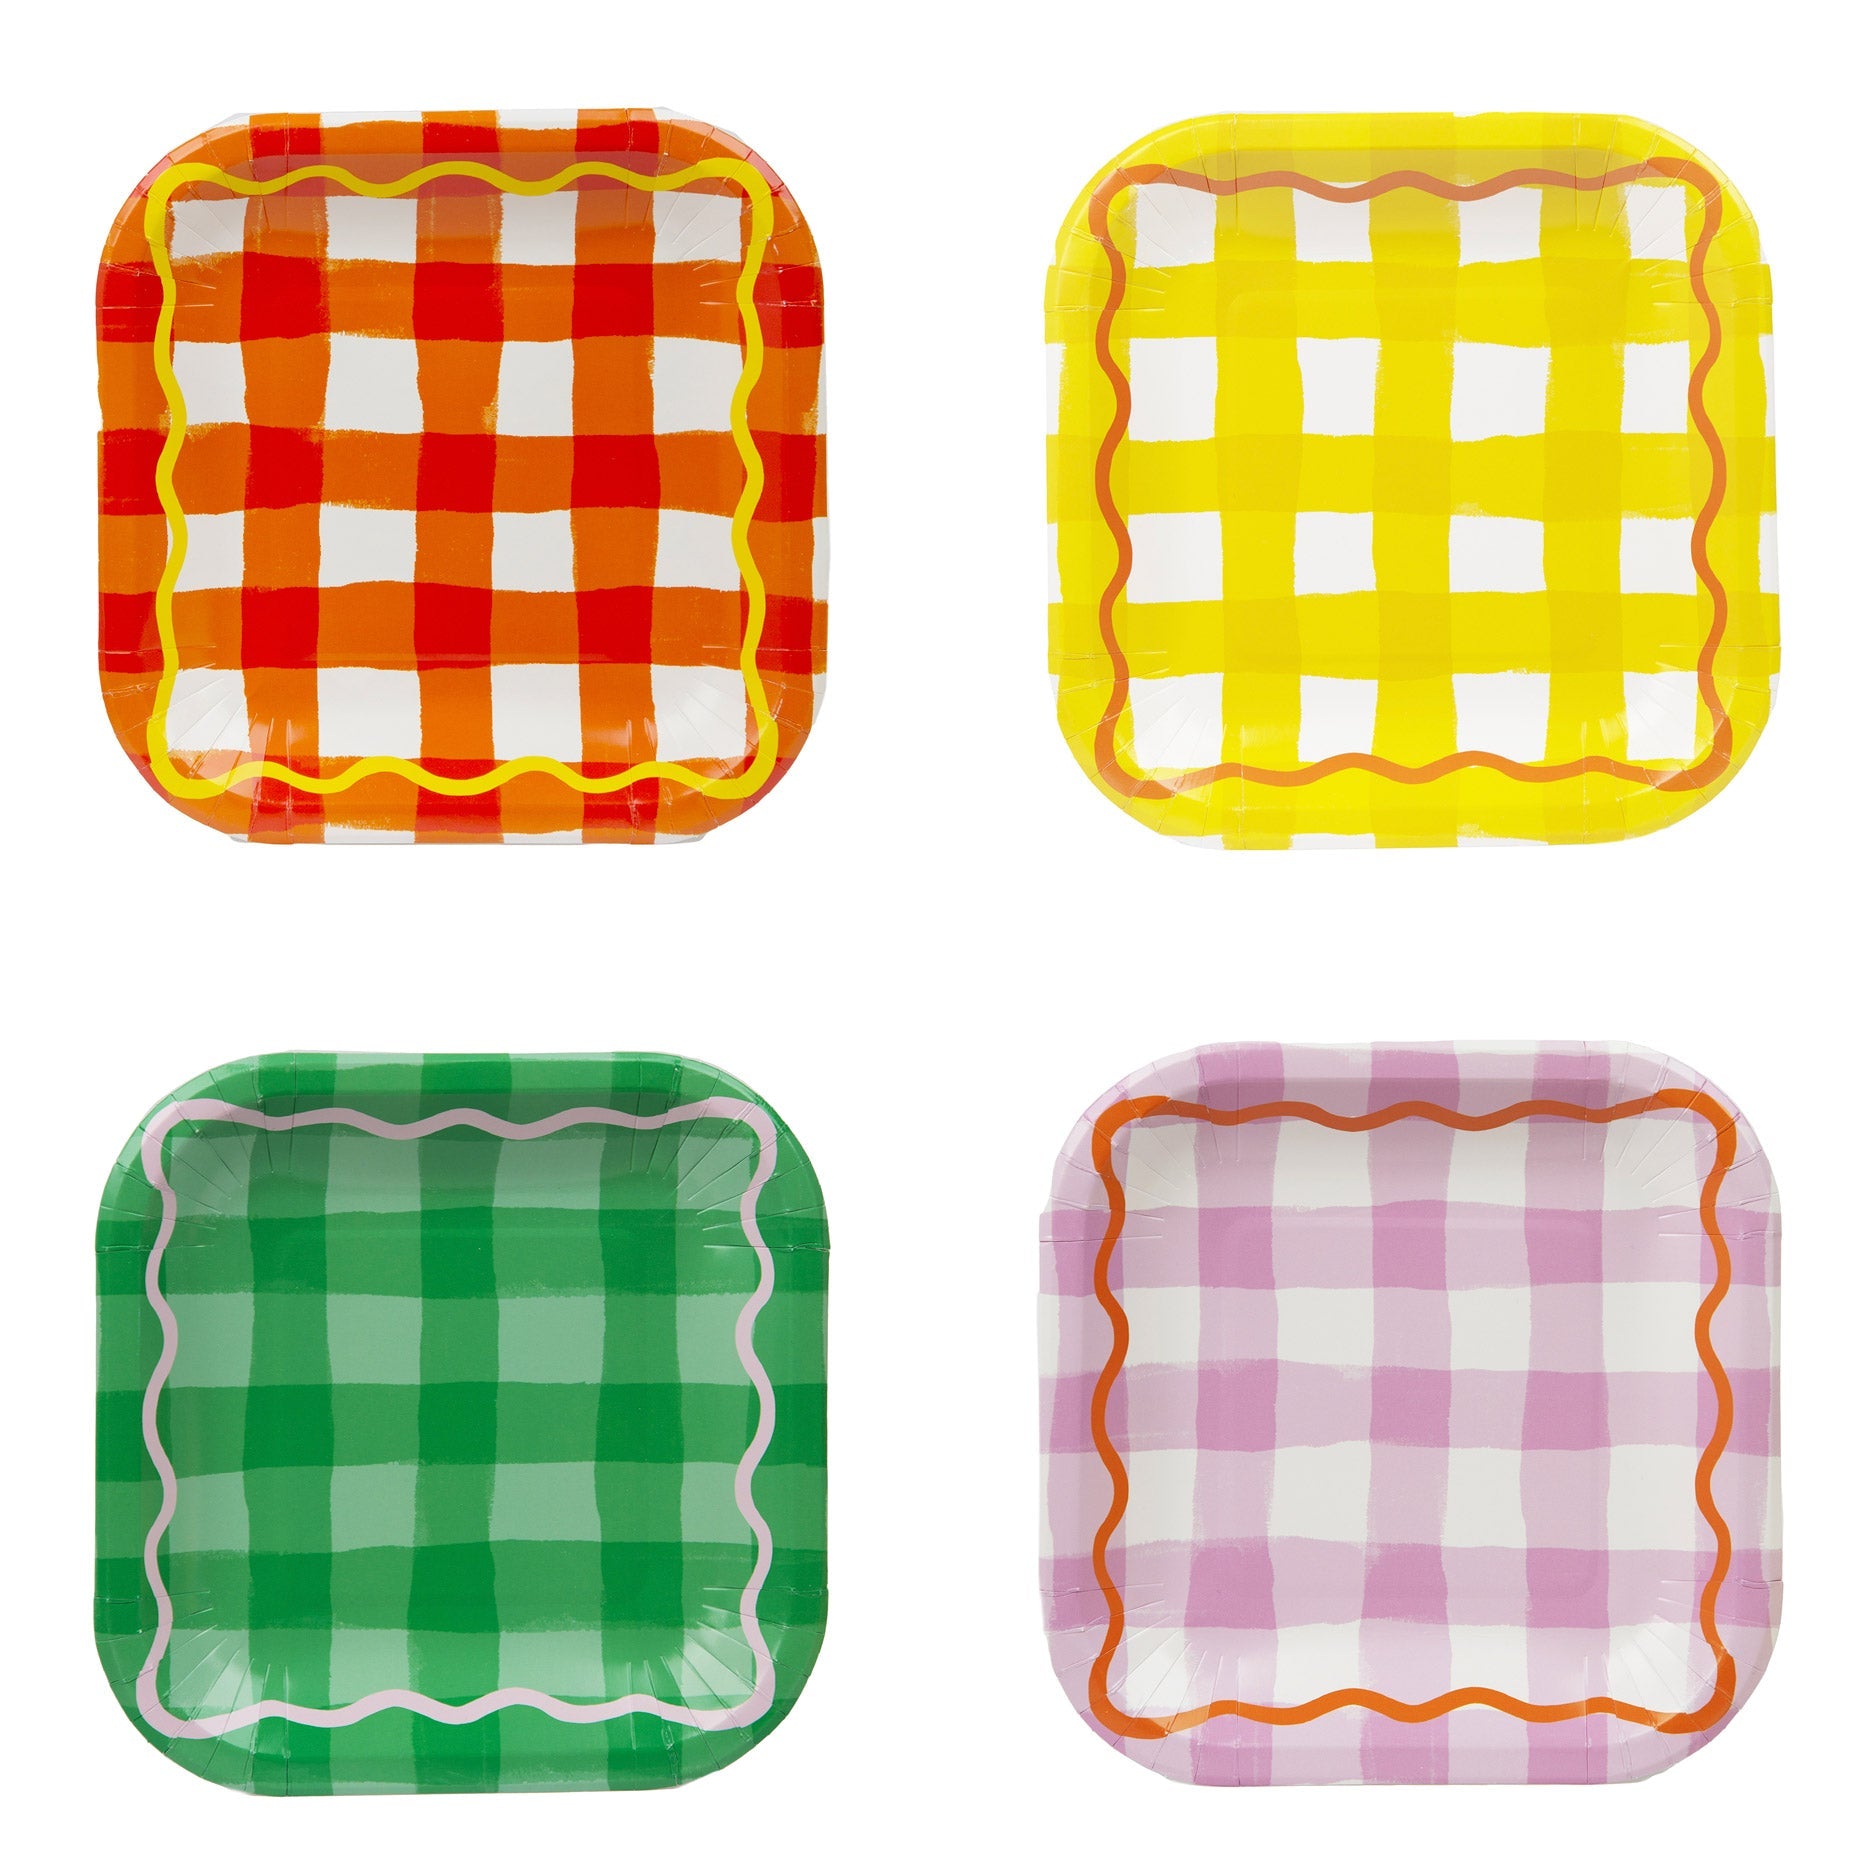 EVERYONE'S WELCOME SQUARE PAPER
PLATES 17CM 12PK